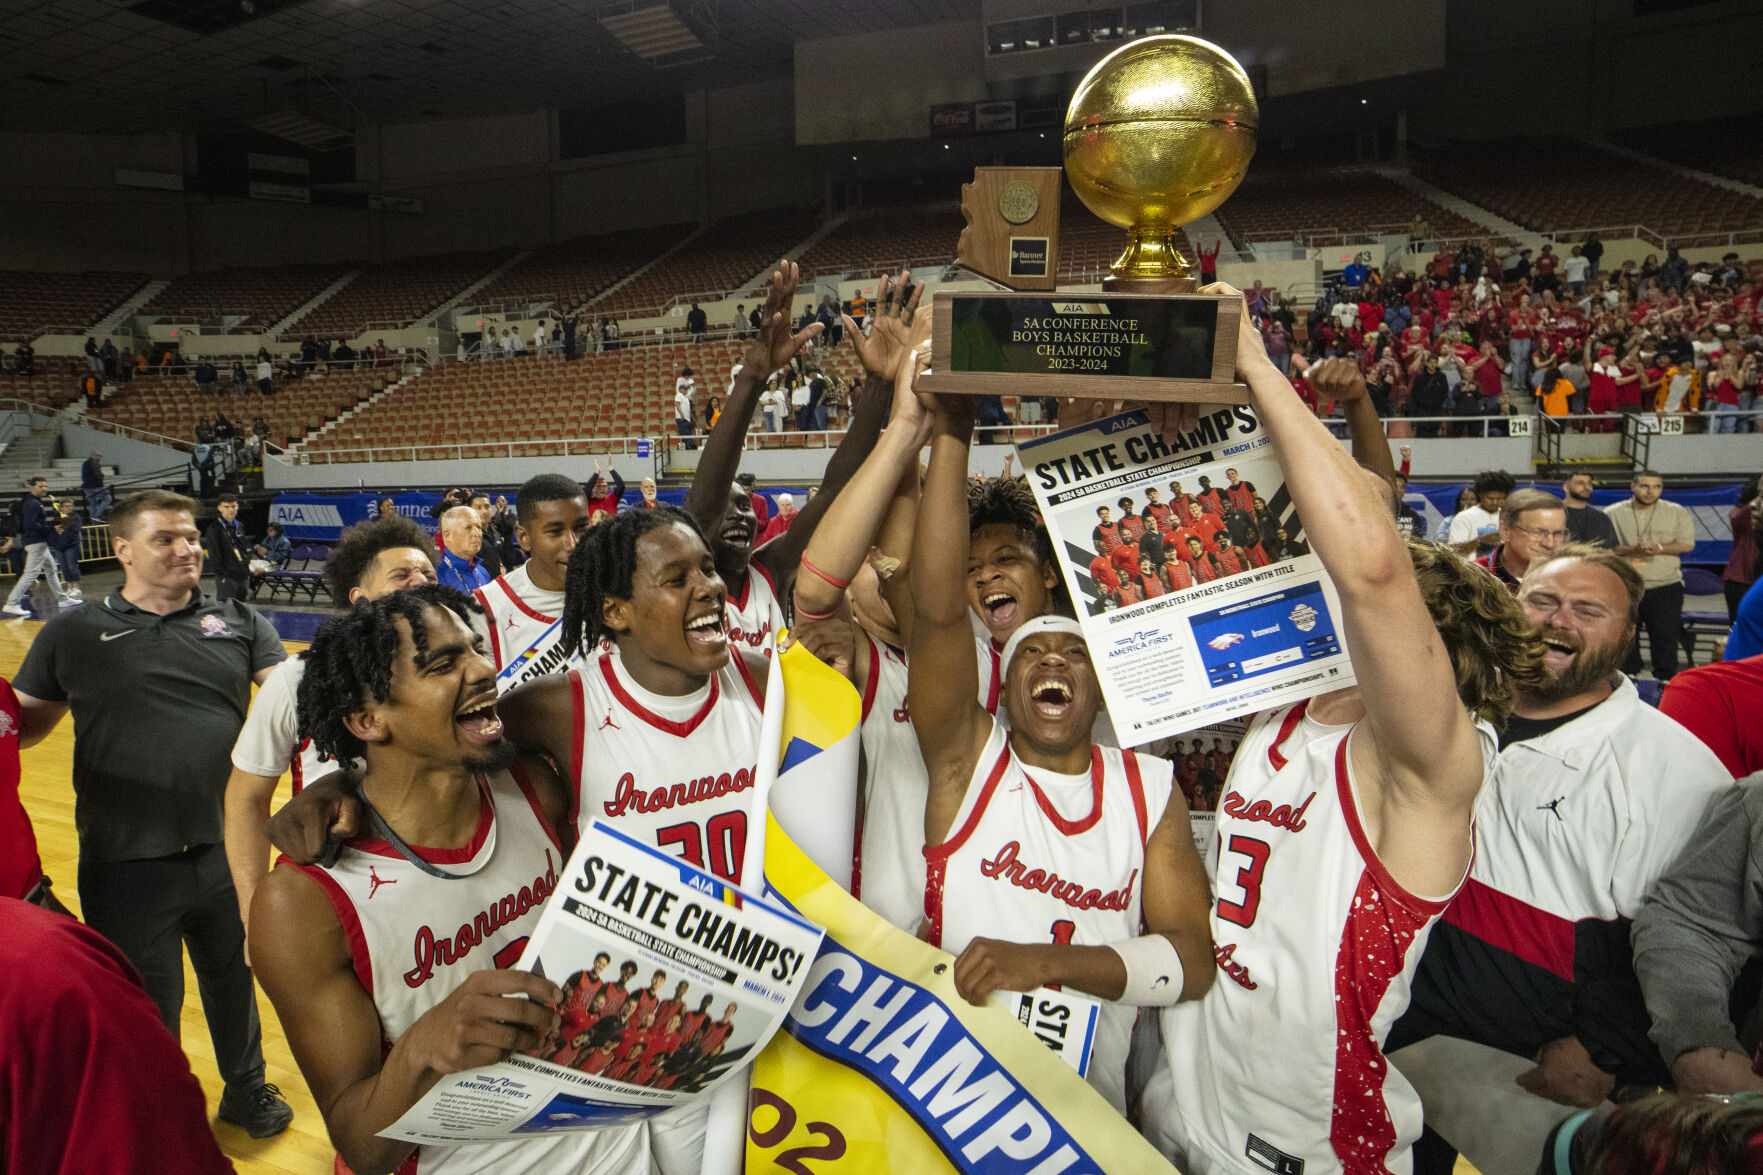 Ironwood basketball clinches 5A state title with stellar performance in emotional victory